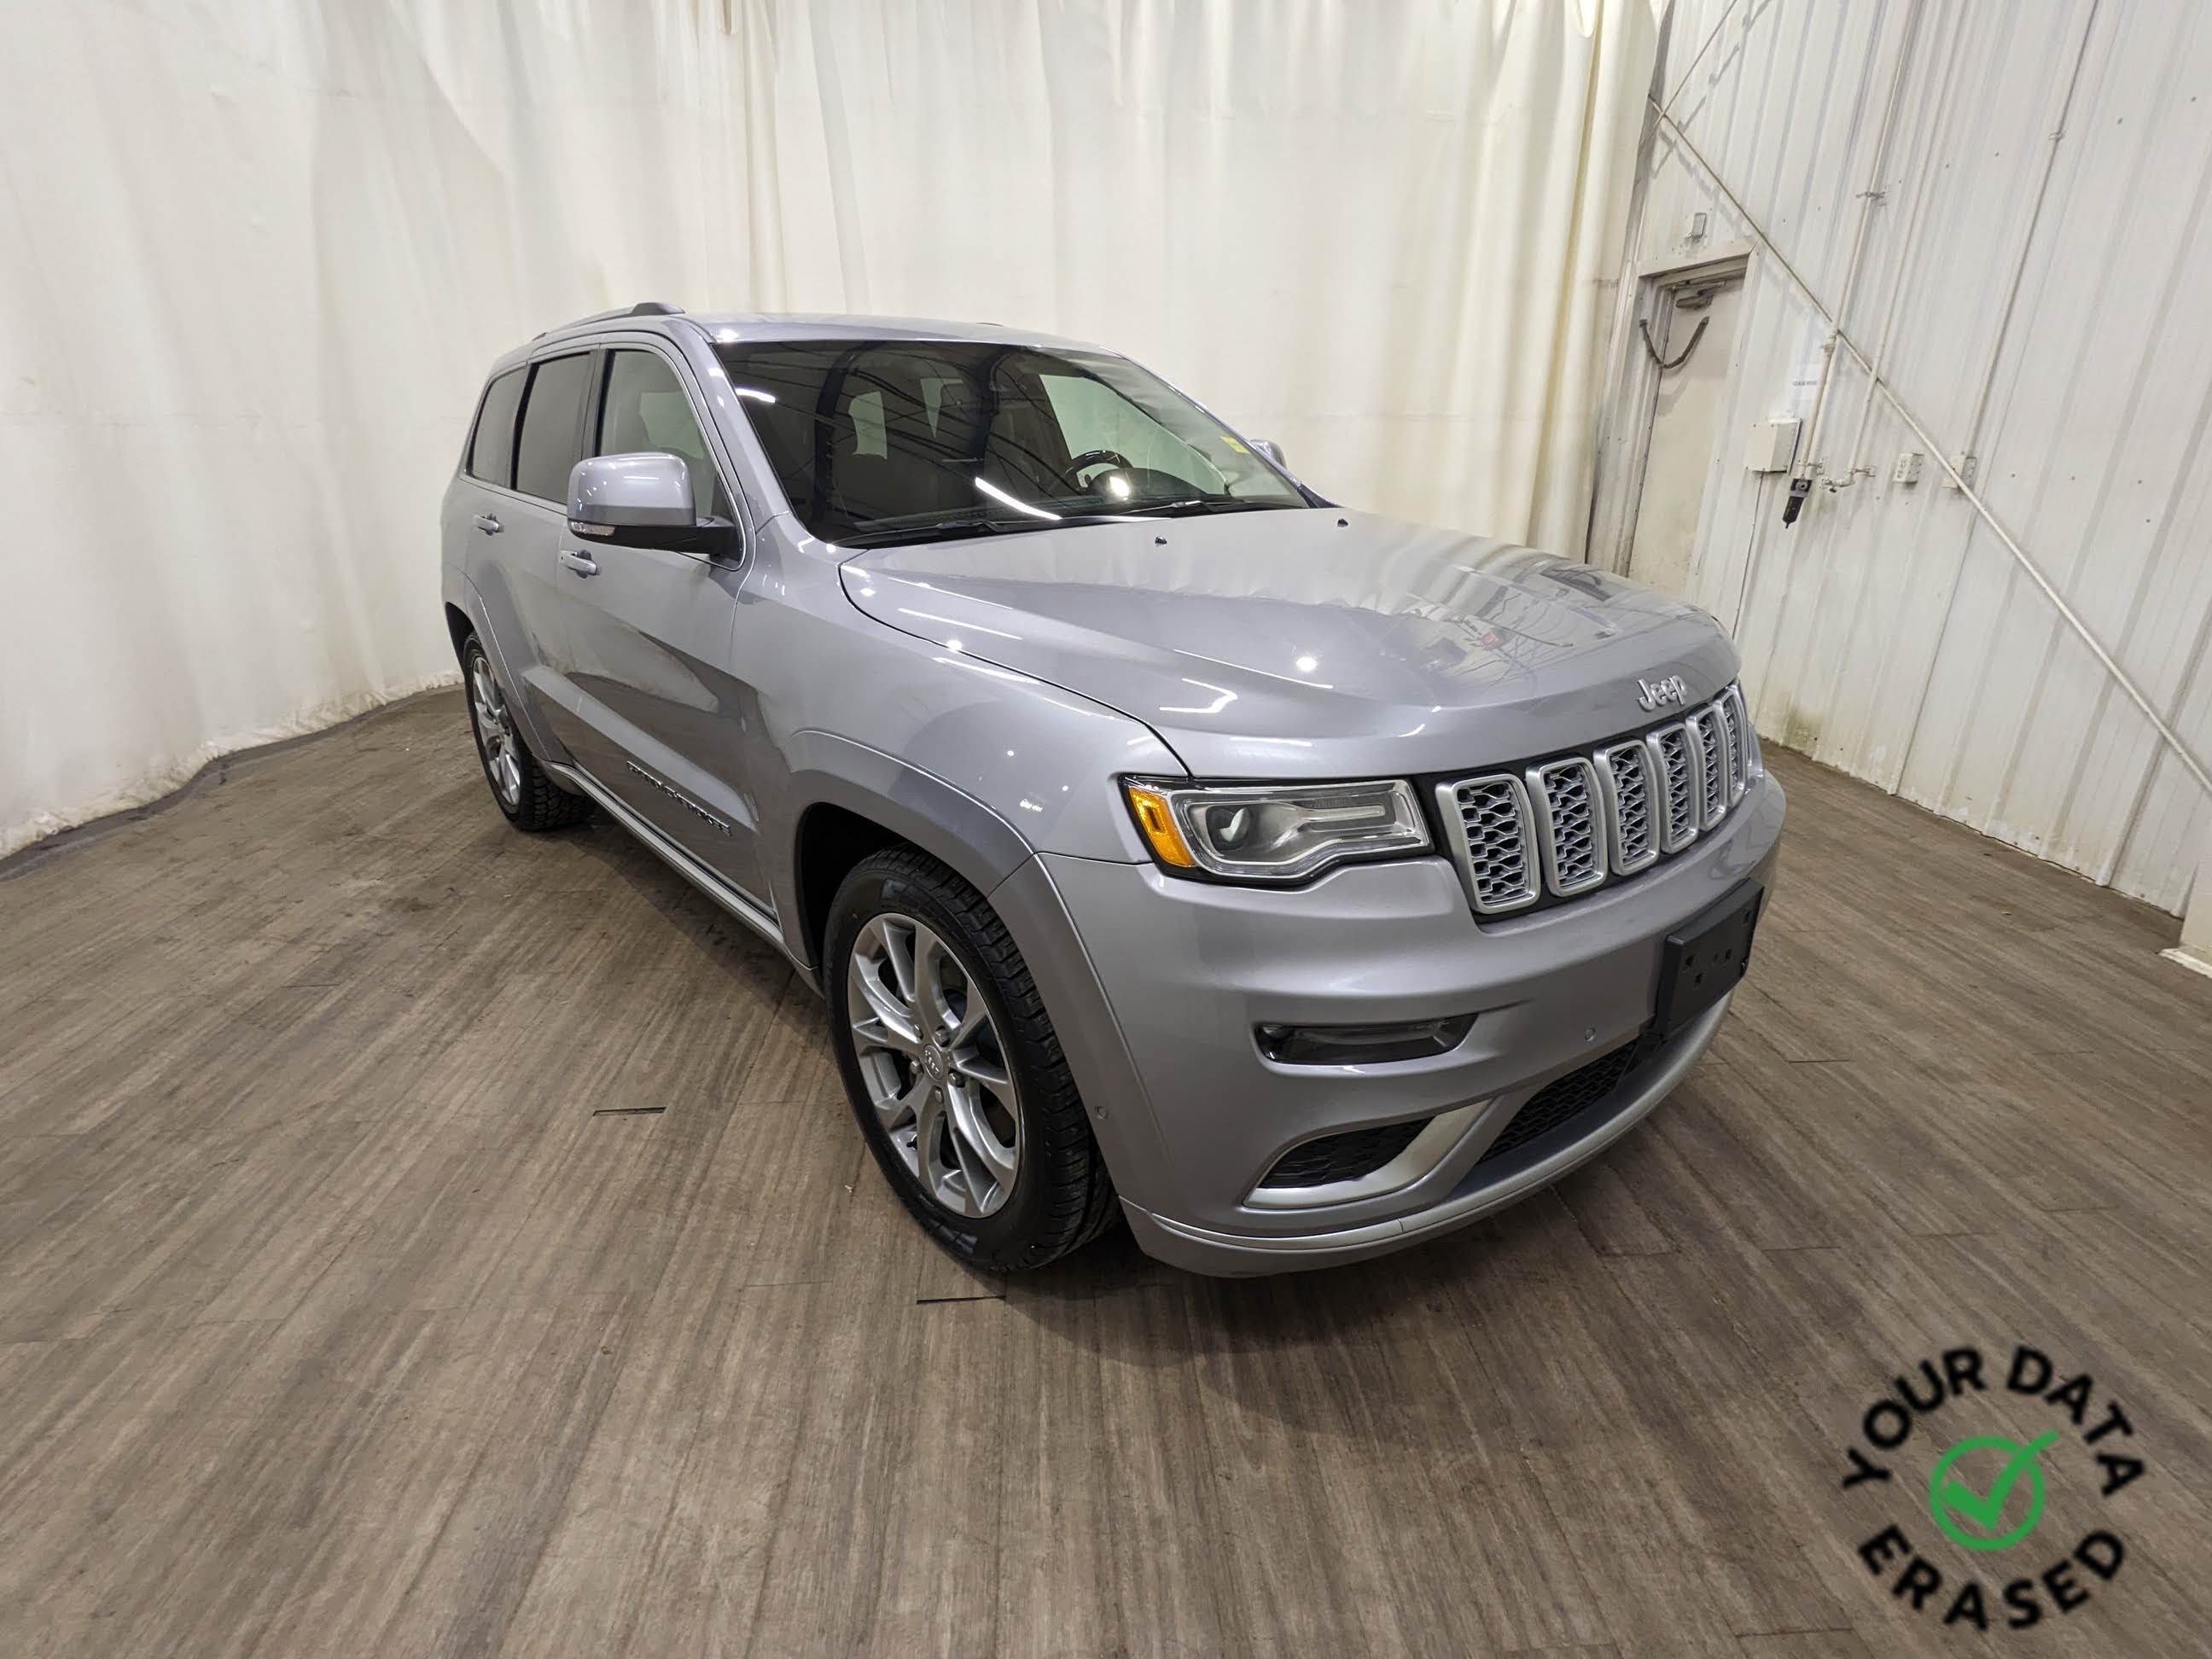 2021 Jeep Grand Cherokee Summit 4x4 | Compare to New @ $74,800!